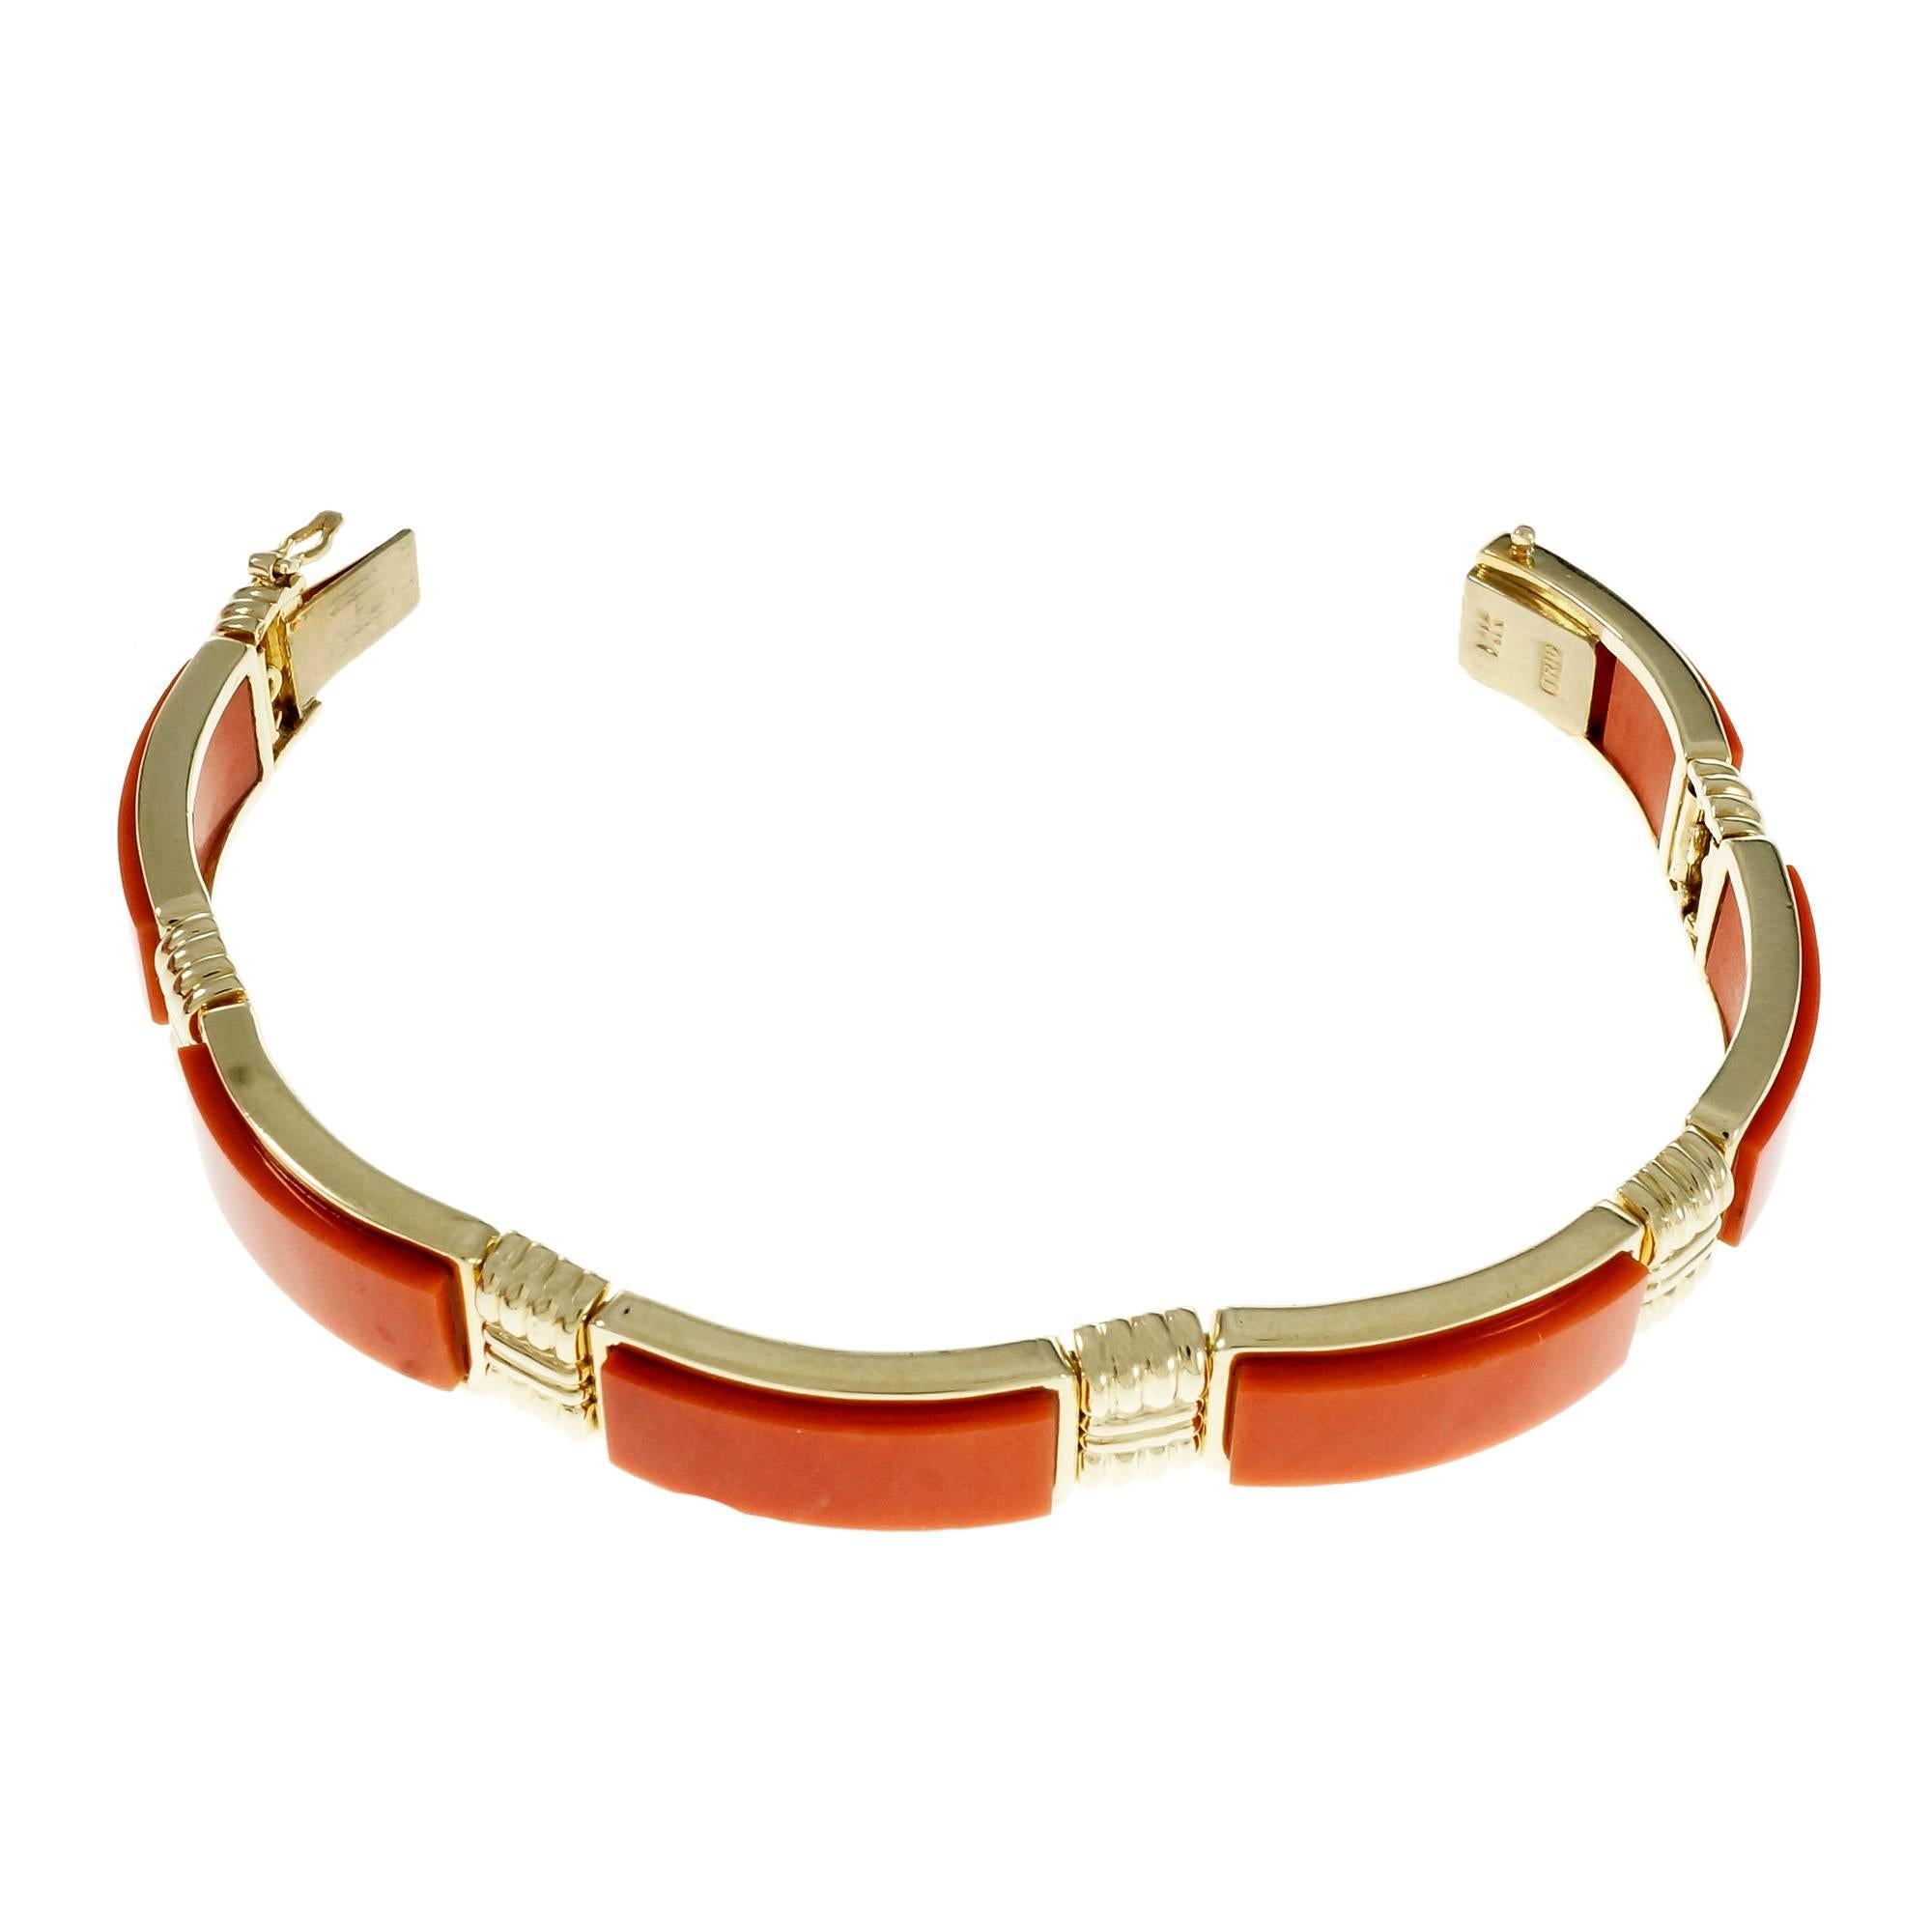 Wonderful natural Coral GIA certified pink orange Trio semi bangle bracelet circa 1960.

6 carved rectangular tablet pinkish orange Coral, GIA certificate #2185072071
14k yellow gold
Tested and stamped: 14k
Hallmark: Trio
32.4 grams
Length: 6.5